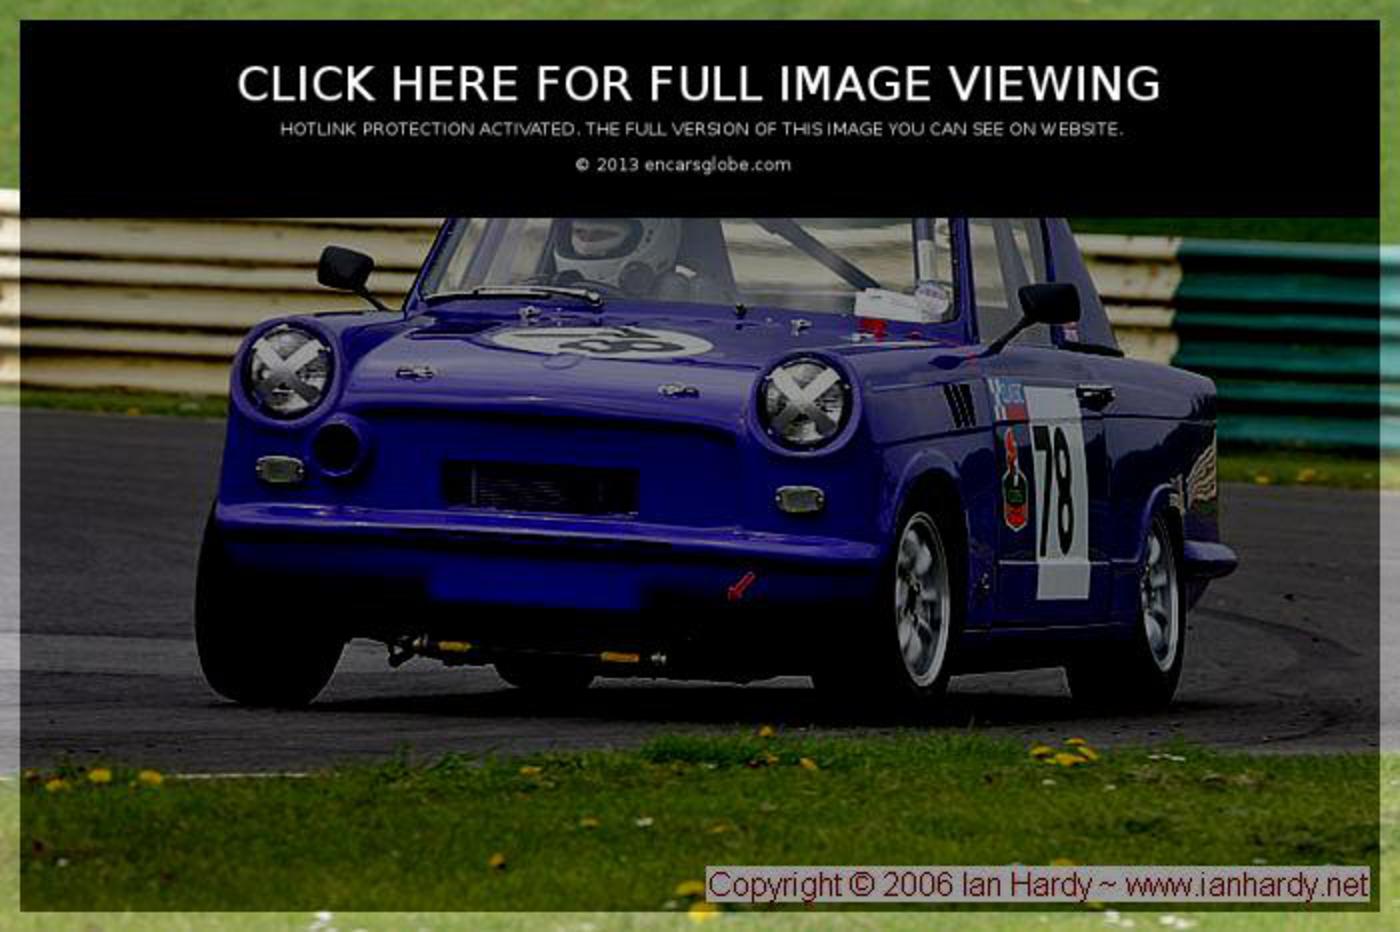 Triumph Herald Coup: Photo gallery, complete information about ...